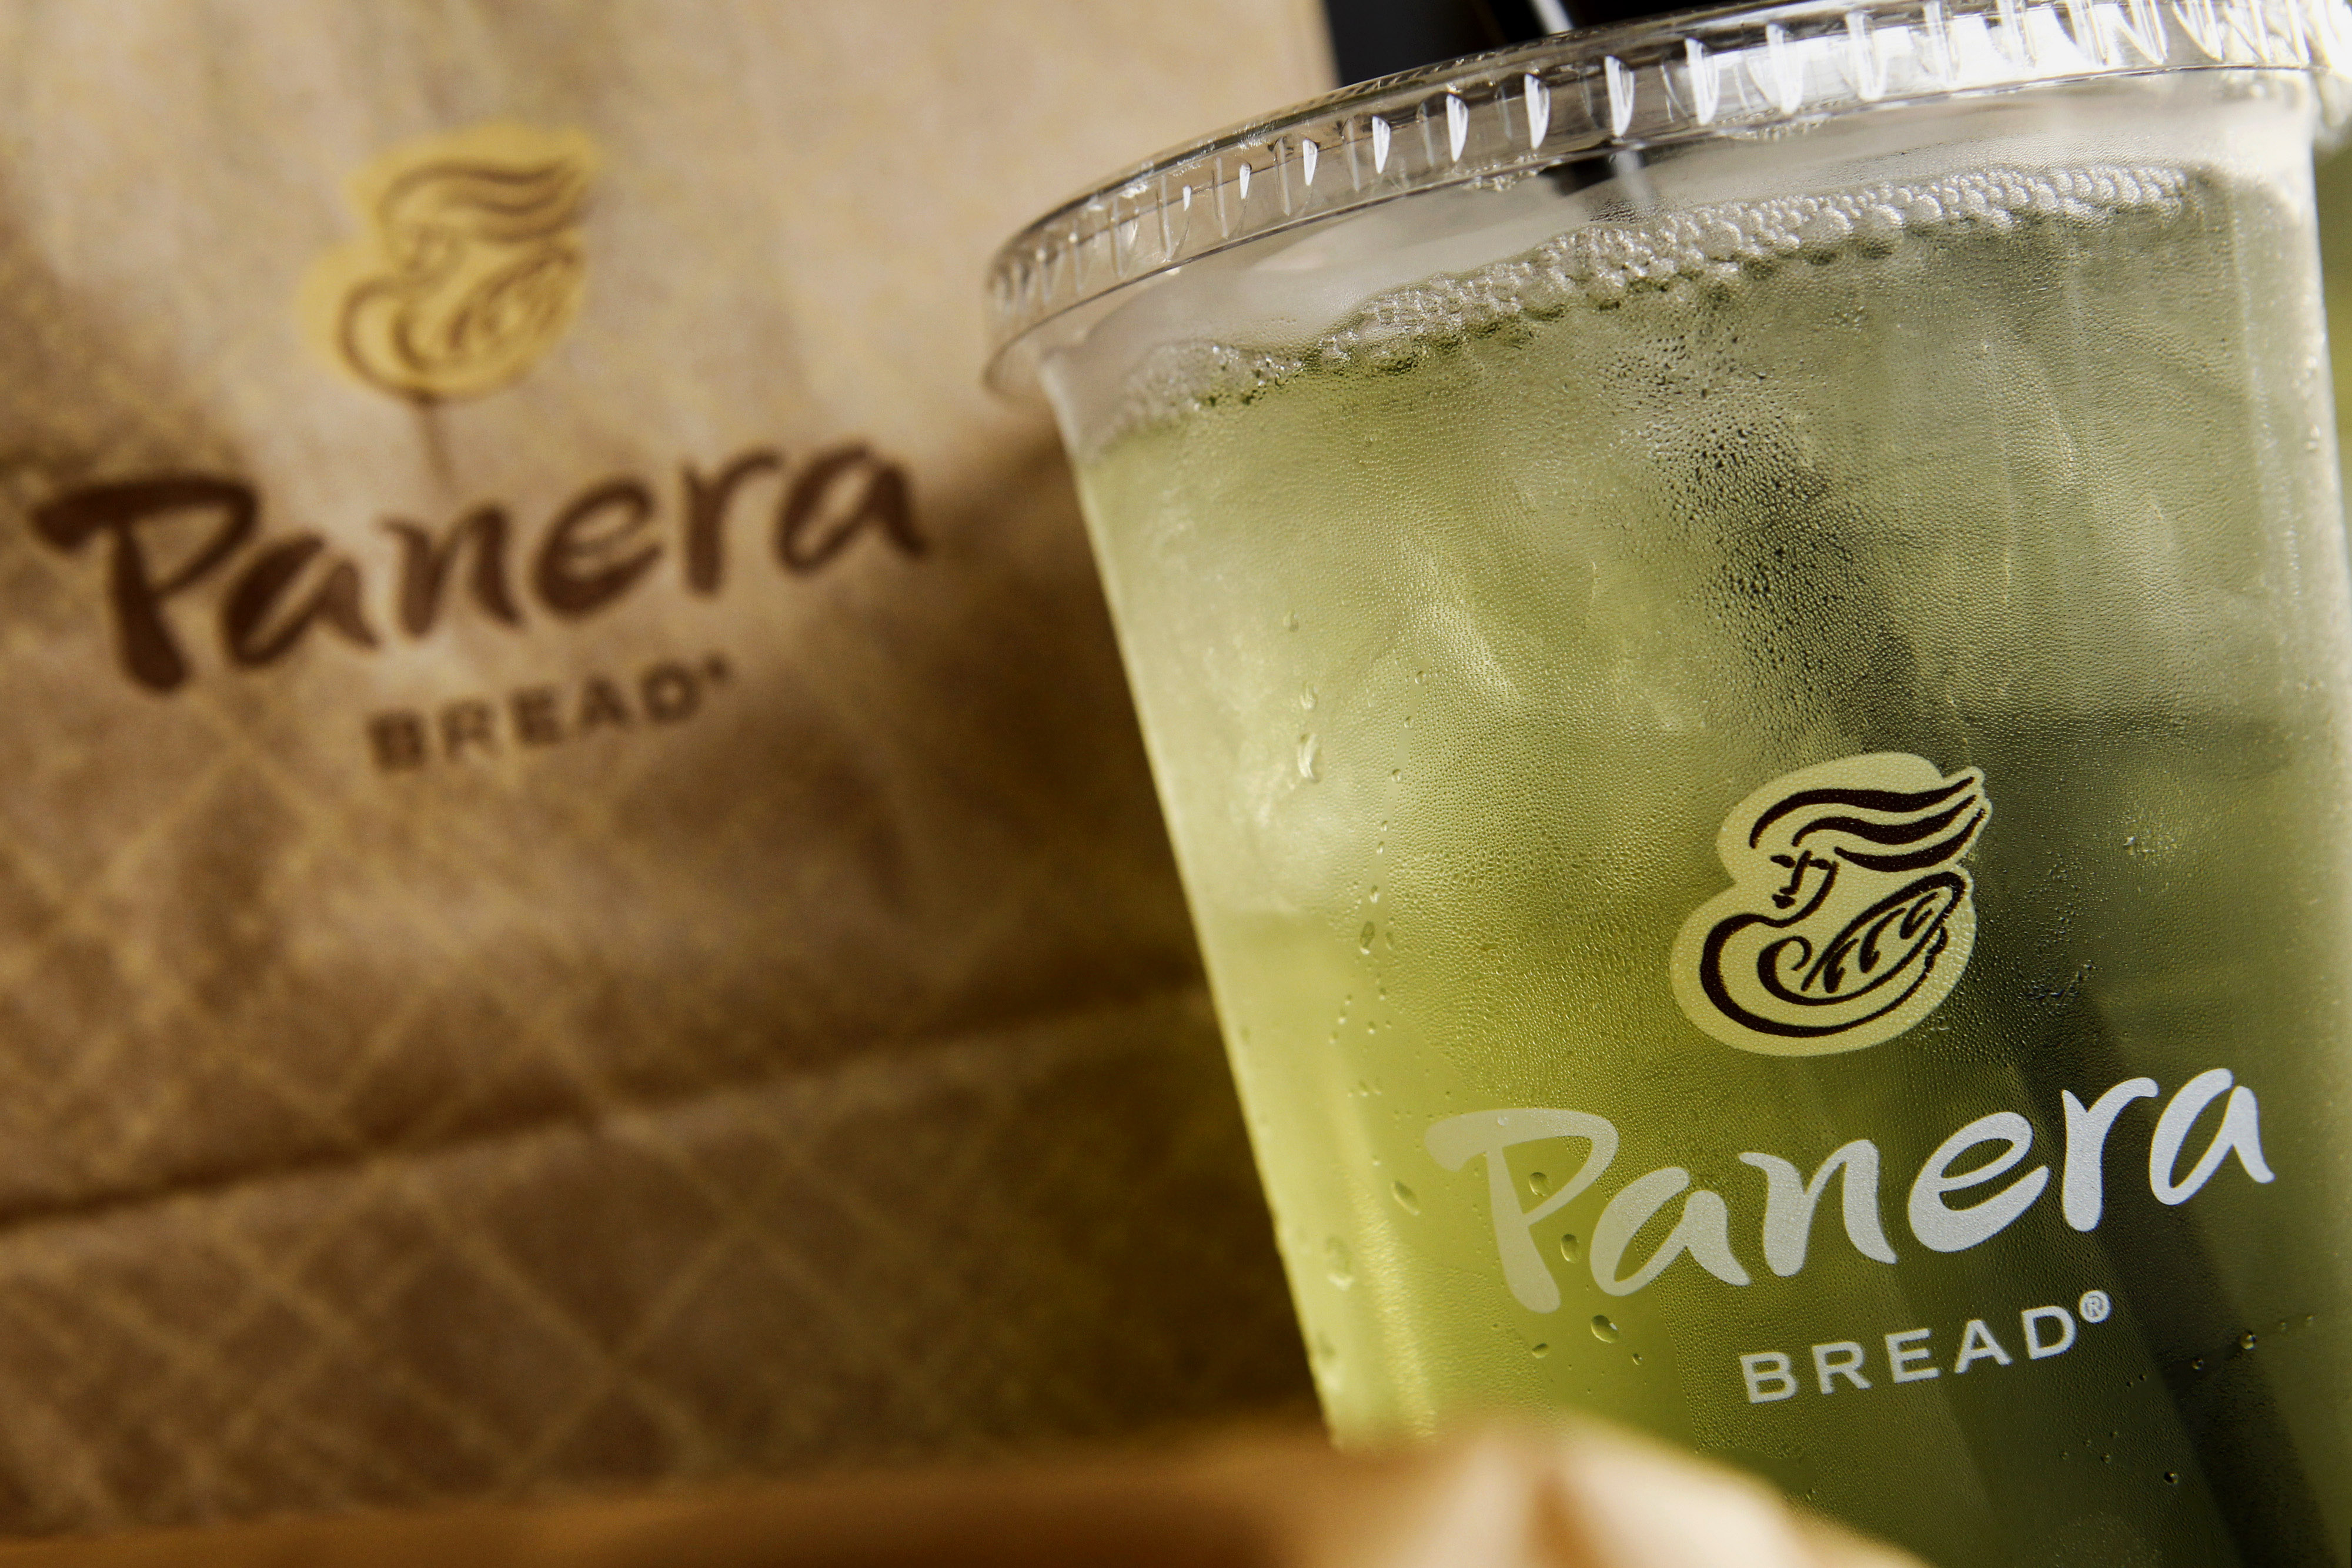 The Panera Bread Co. logo is seen on a cup of iced tea and a bag arranged for a photograph outside of a restaurant in Torrance, California, on Oct. 21, 2013. (Patrick T. Fallon—Bloomberg/Getty Images)